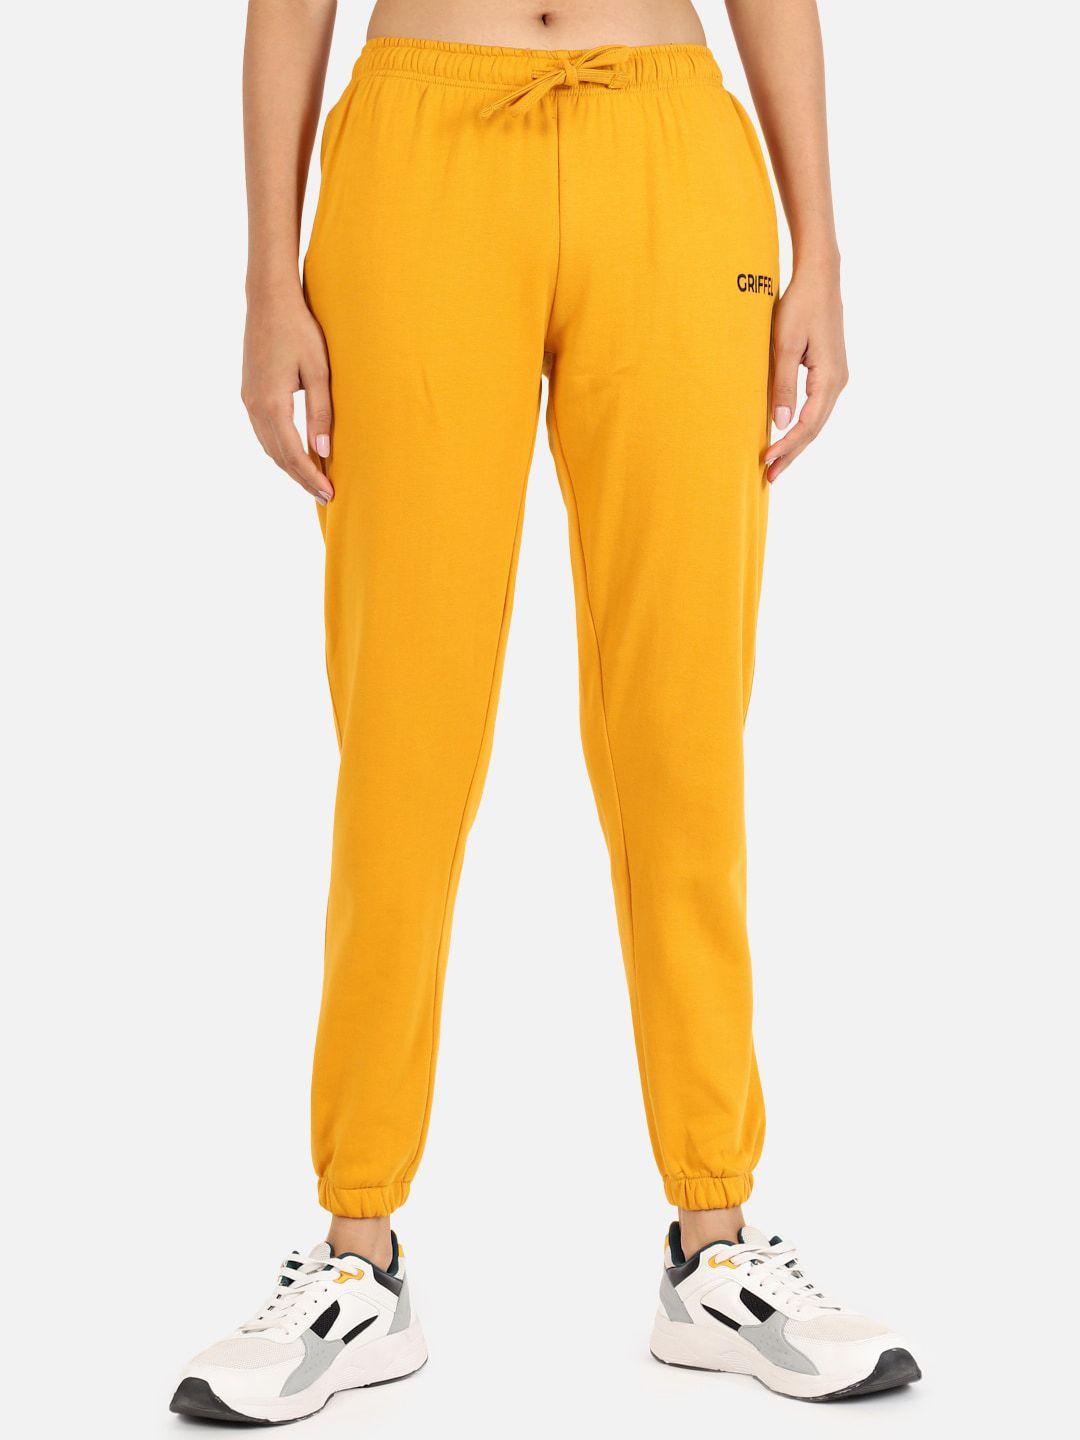 griffel-women-mustard-yellow-solid-joggers